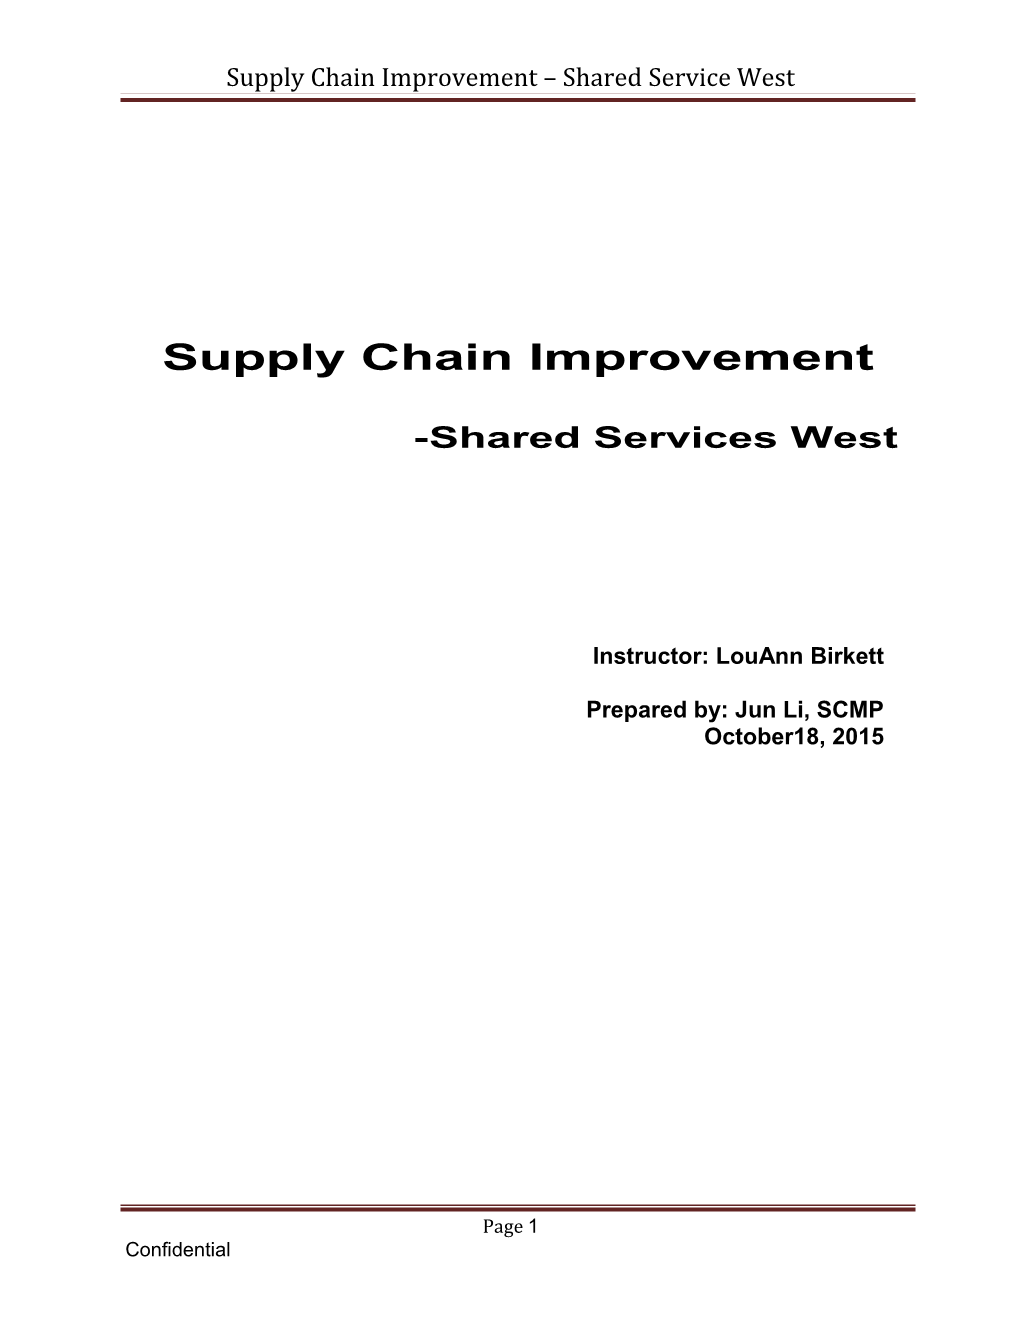 Supply Chain Improvement Shared Service West